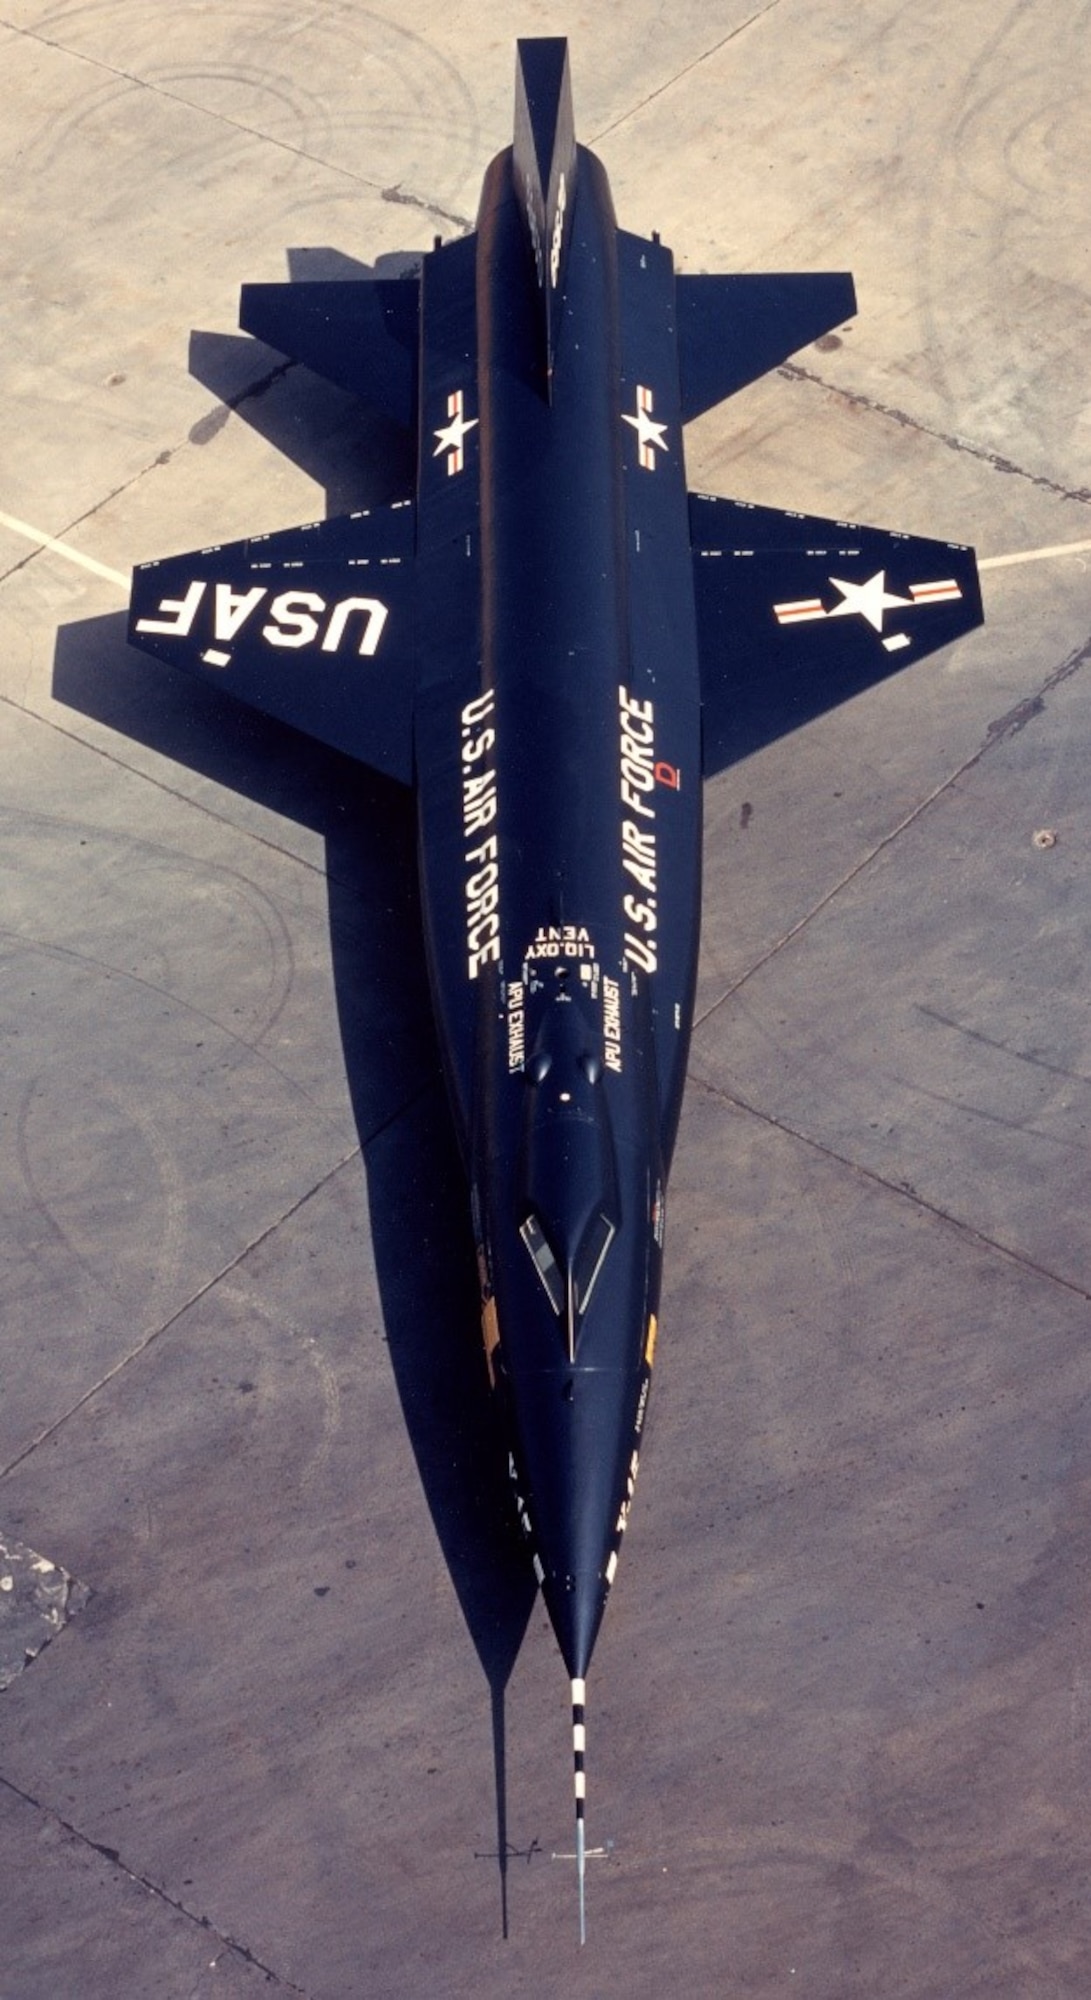 The sleek lines of the North American Aviation X-15 are prevalent in this view taken during the rollout on 15 October 1958.